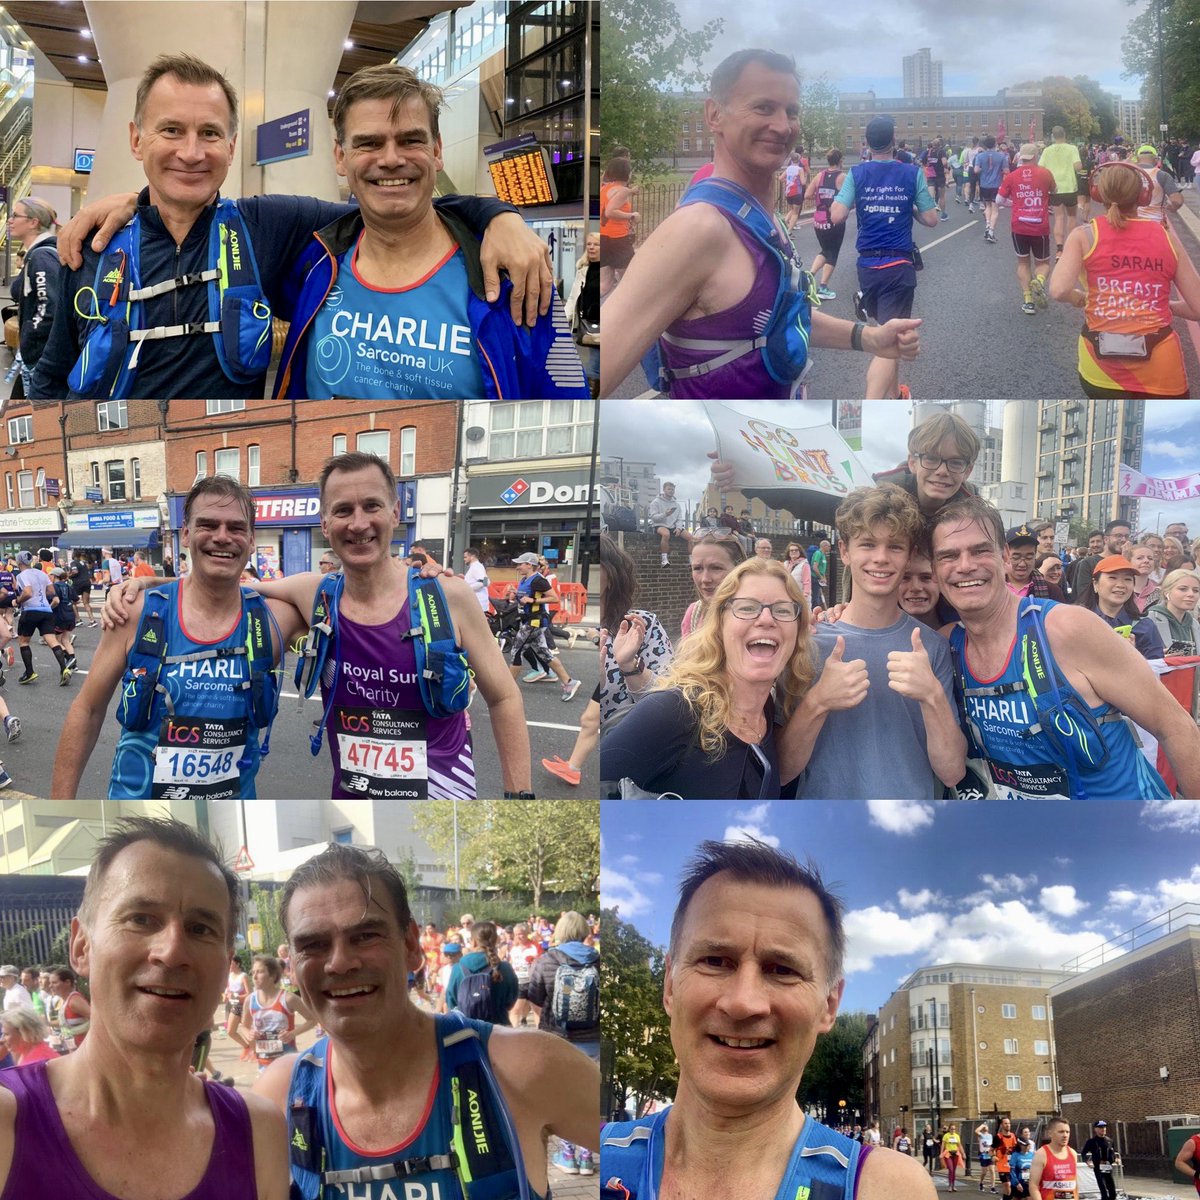 What a day it’s been so far! A few miles left, so there’s still time to donate to @RSCharity justgiving.com/fundraising/th… #LondonMarathon @LondonMarathon @RoyalSurrey